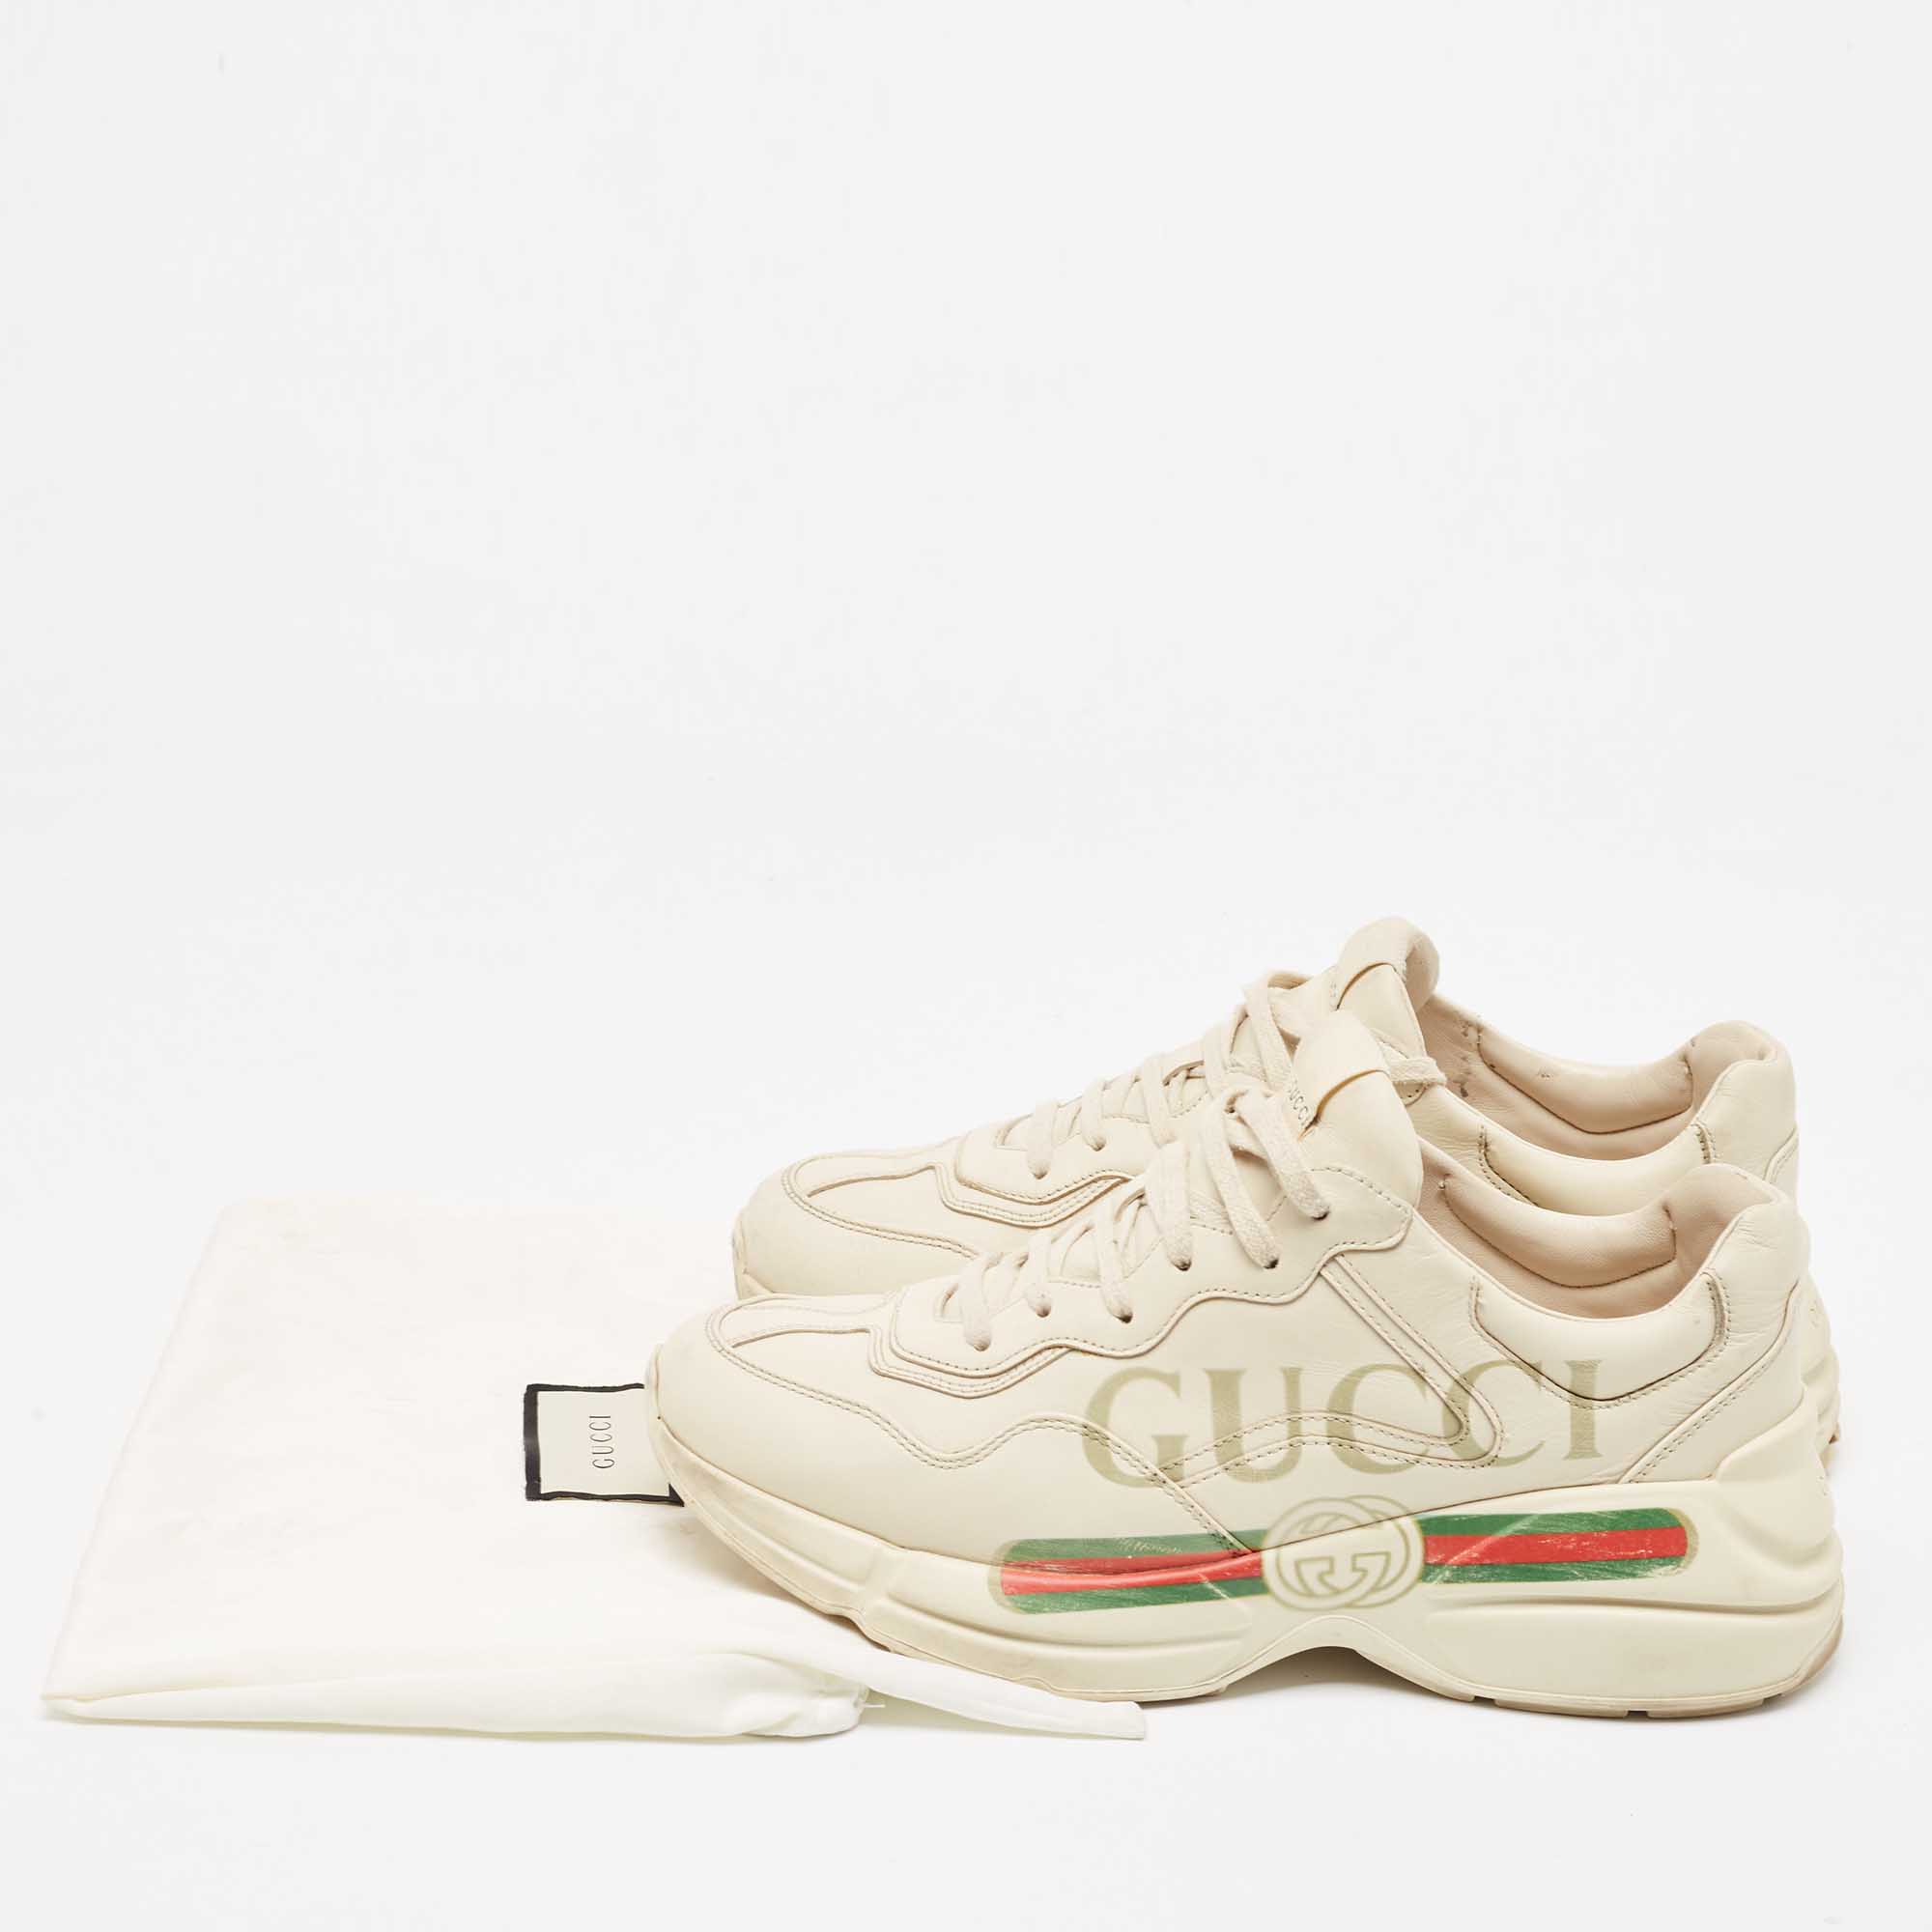 Gucci Cream Leather Rhyton Sneakers Size 41